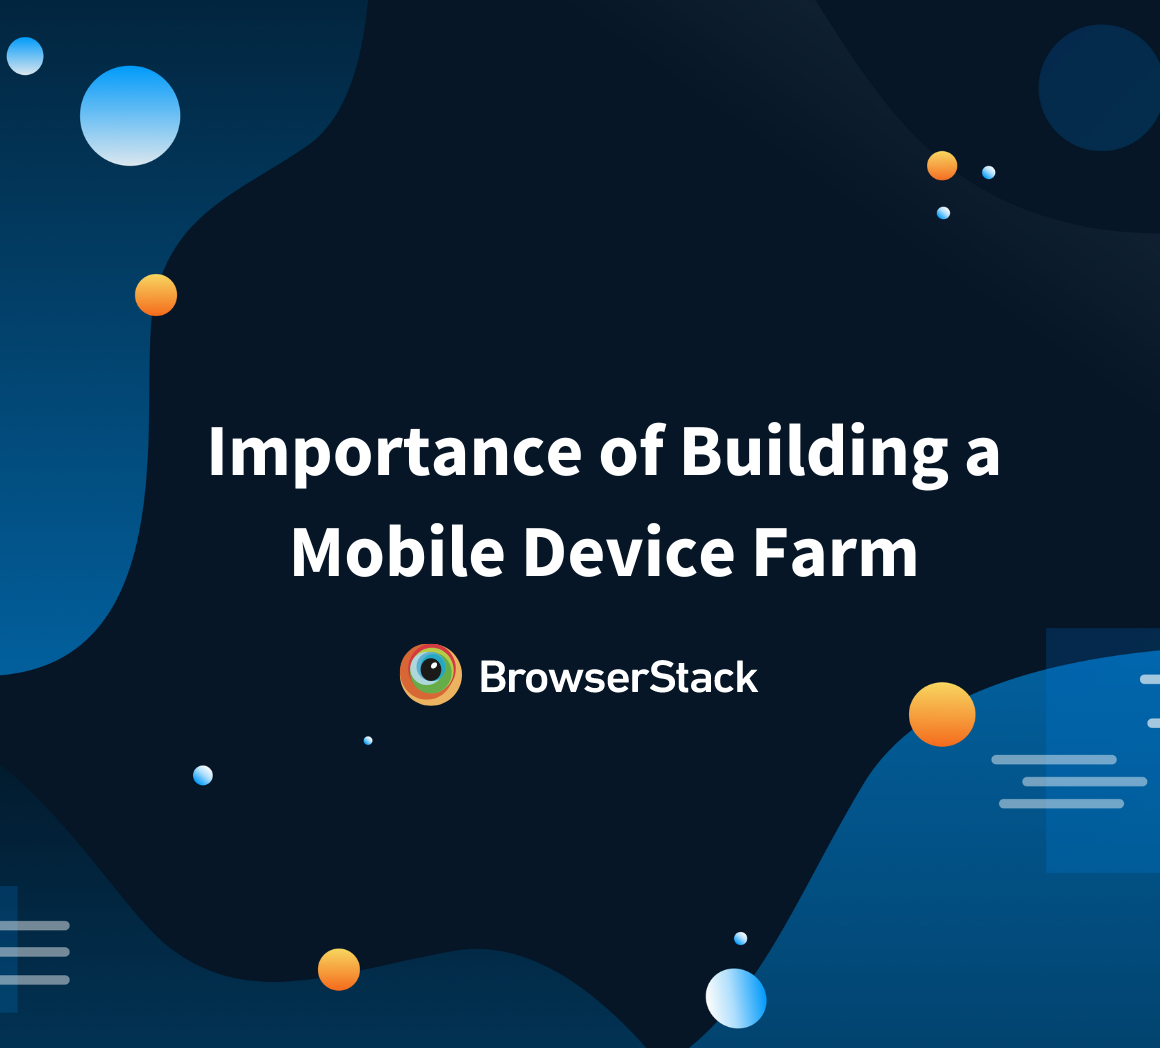 Why is it Important to build a Mobile Device Farm?